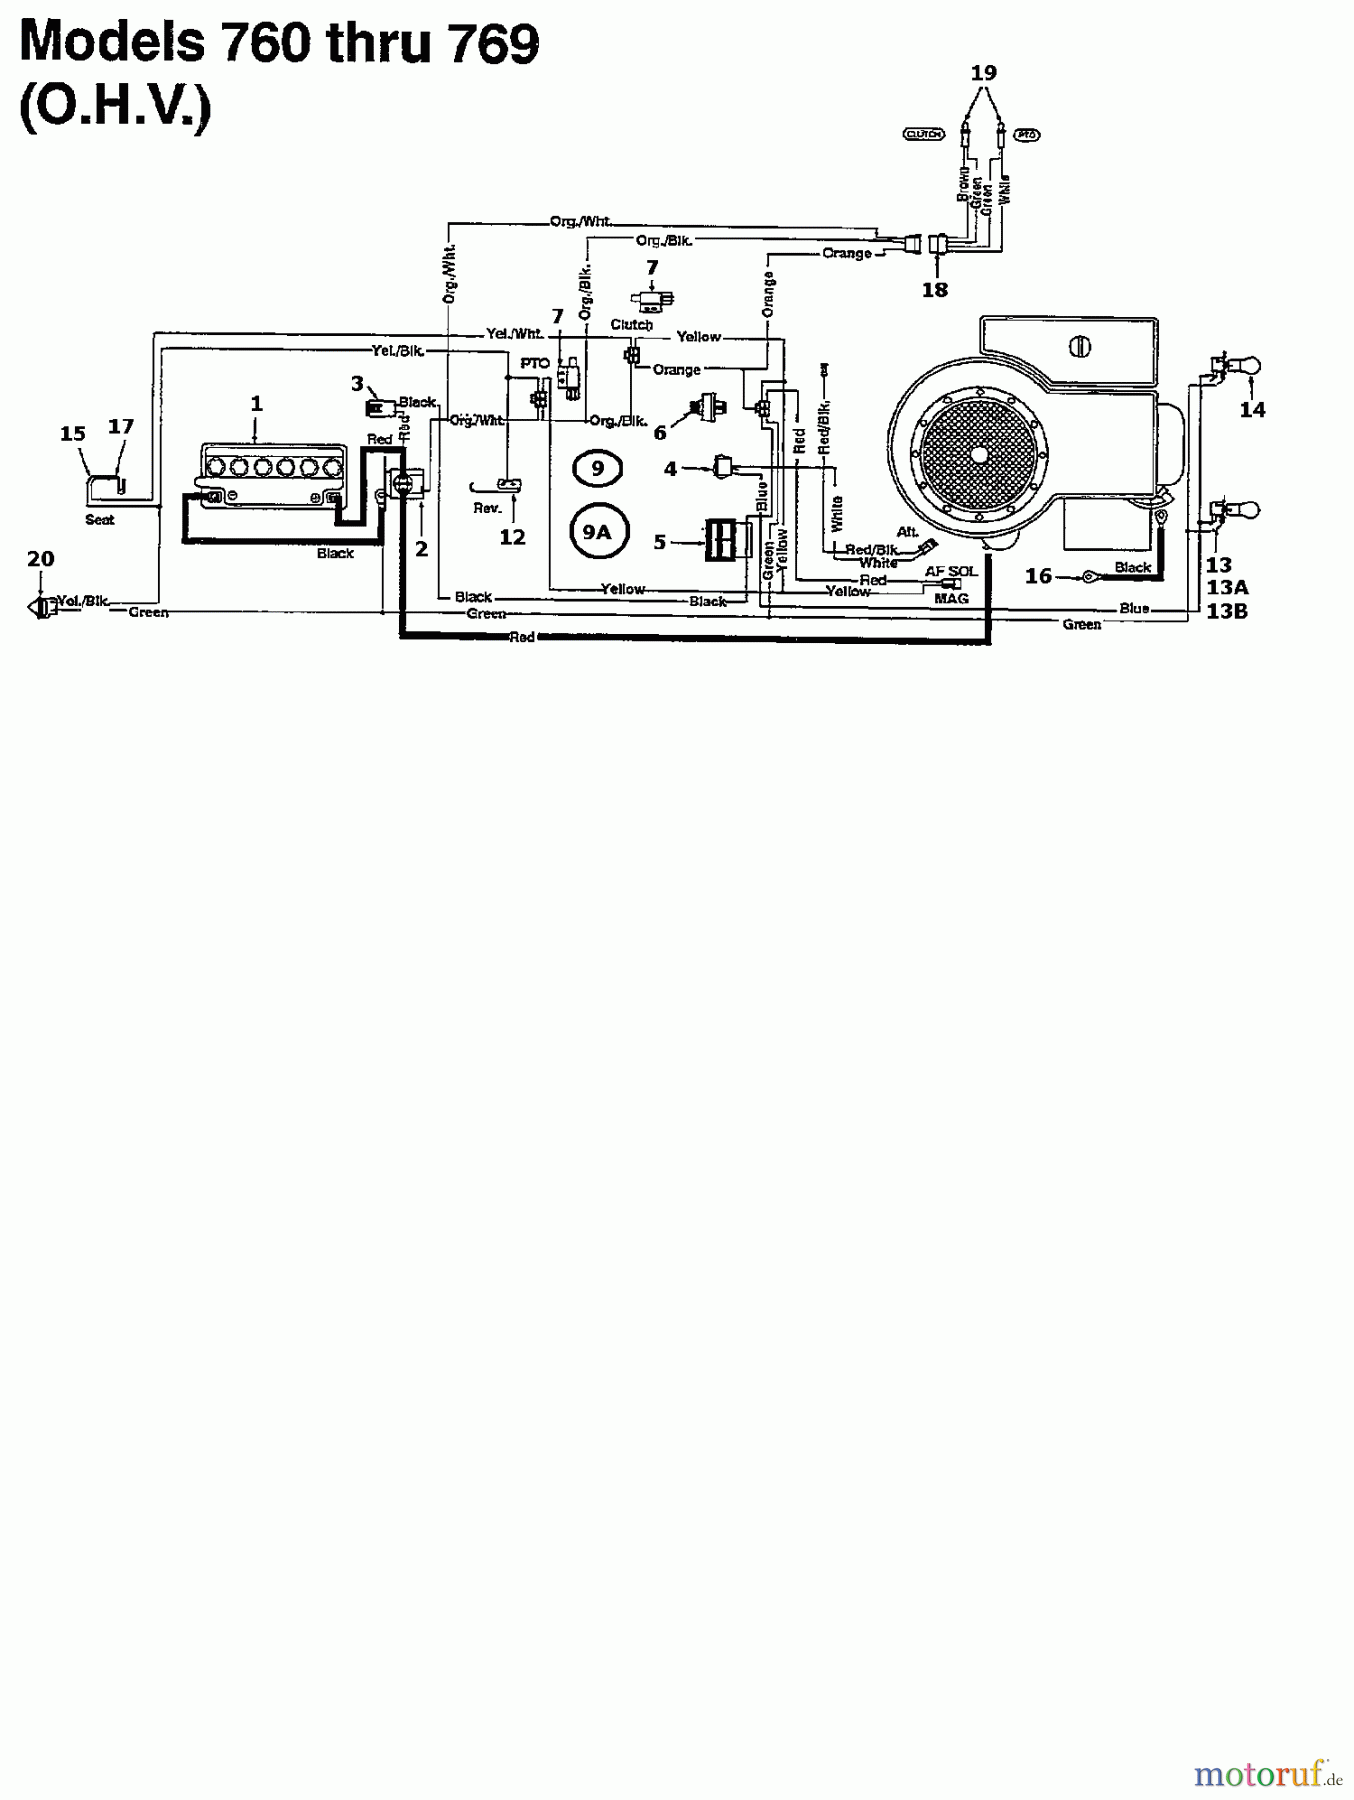  Agria Lawn tractors 4600/102 H 135K769N609  (1995) Wiring diagram for O.H.V.